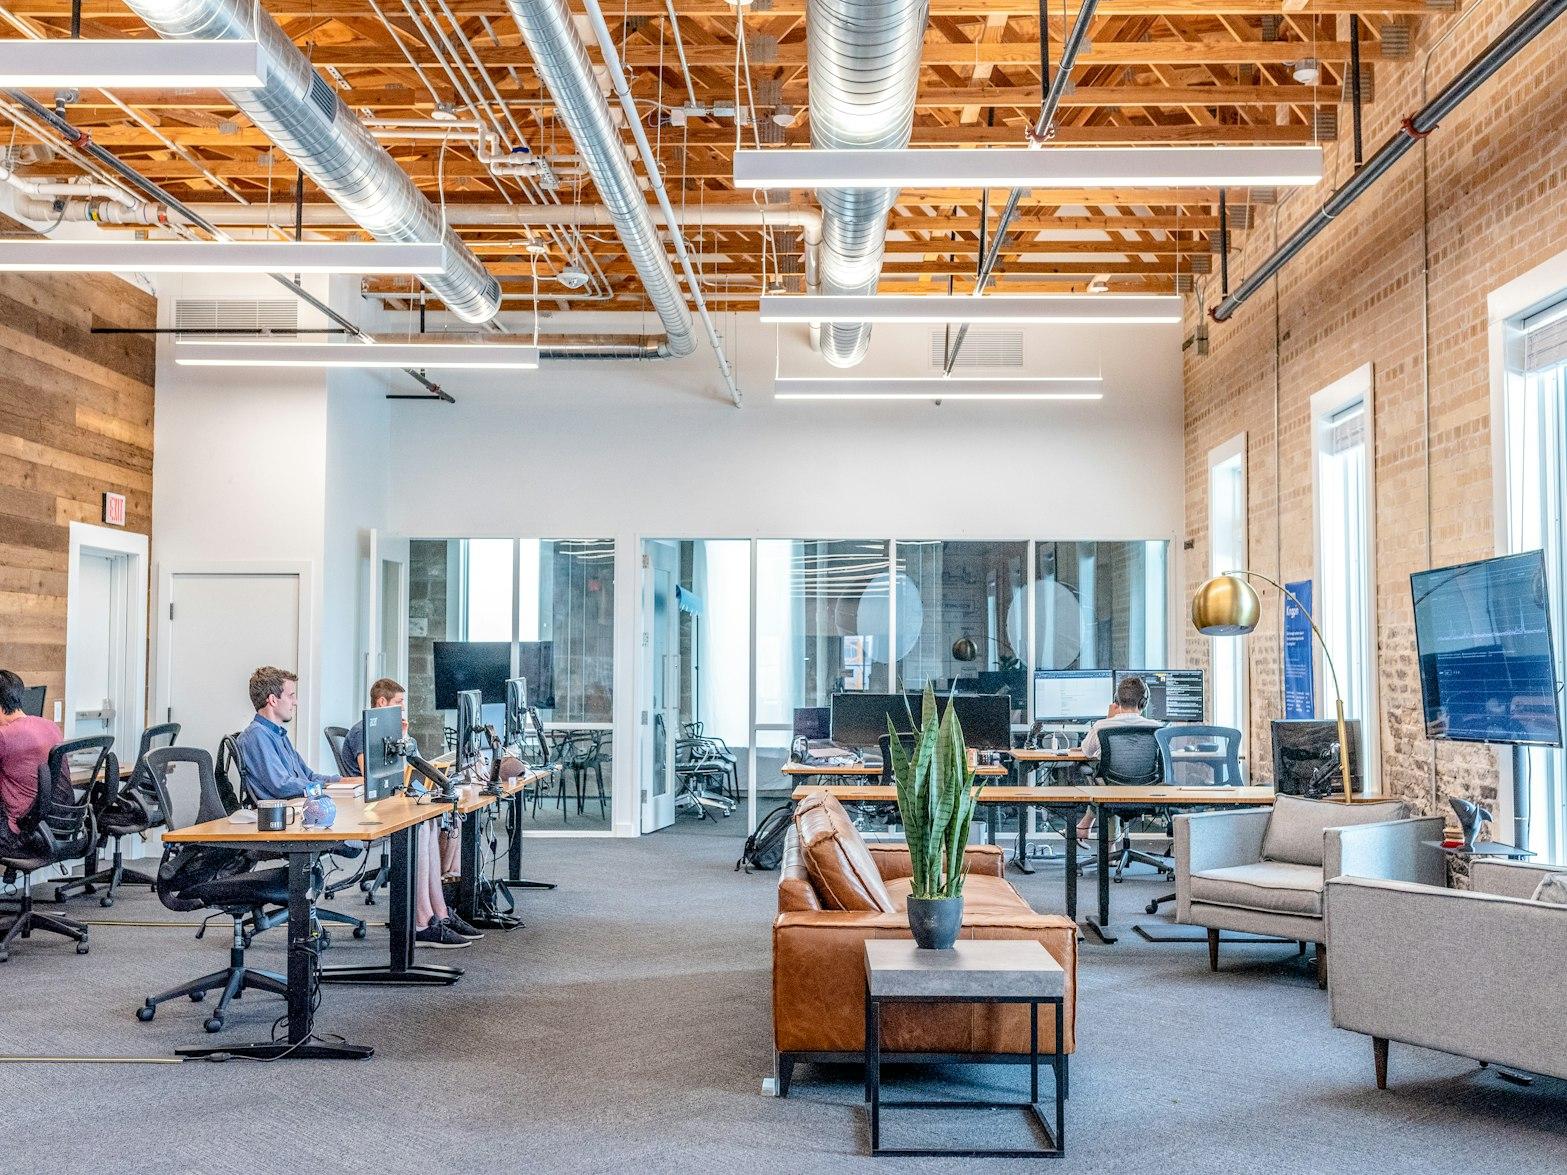 Office with people raising capital through crowdfunding